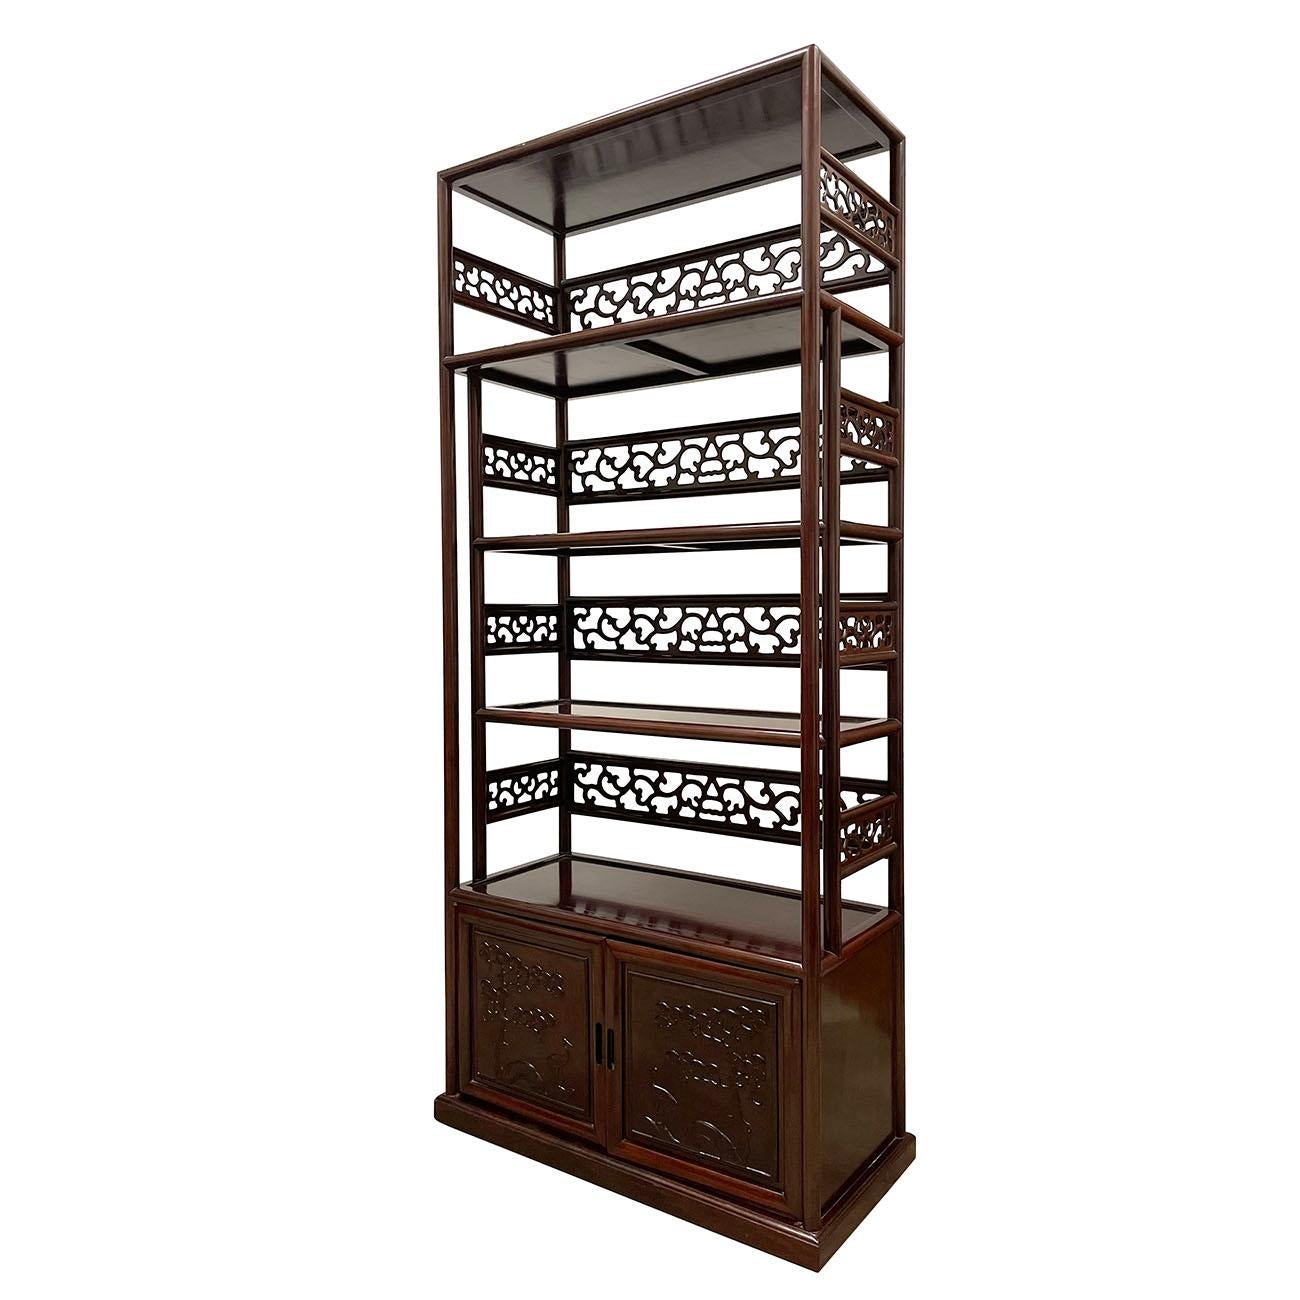 This wonderful Chinese Vintage hand carved Book Shelf was made from solid hardwood in about 1950's. You may easily see from the pictures that It is still in its original condition. It is featured 4 layers shelves on the top and double open doors